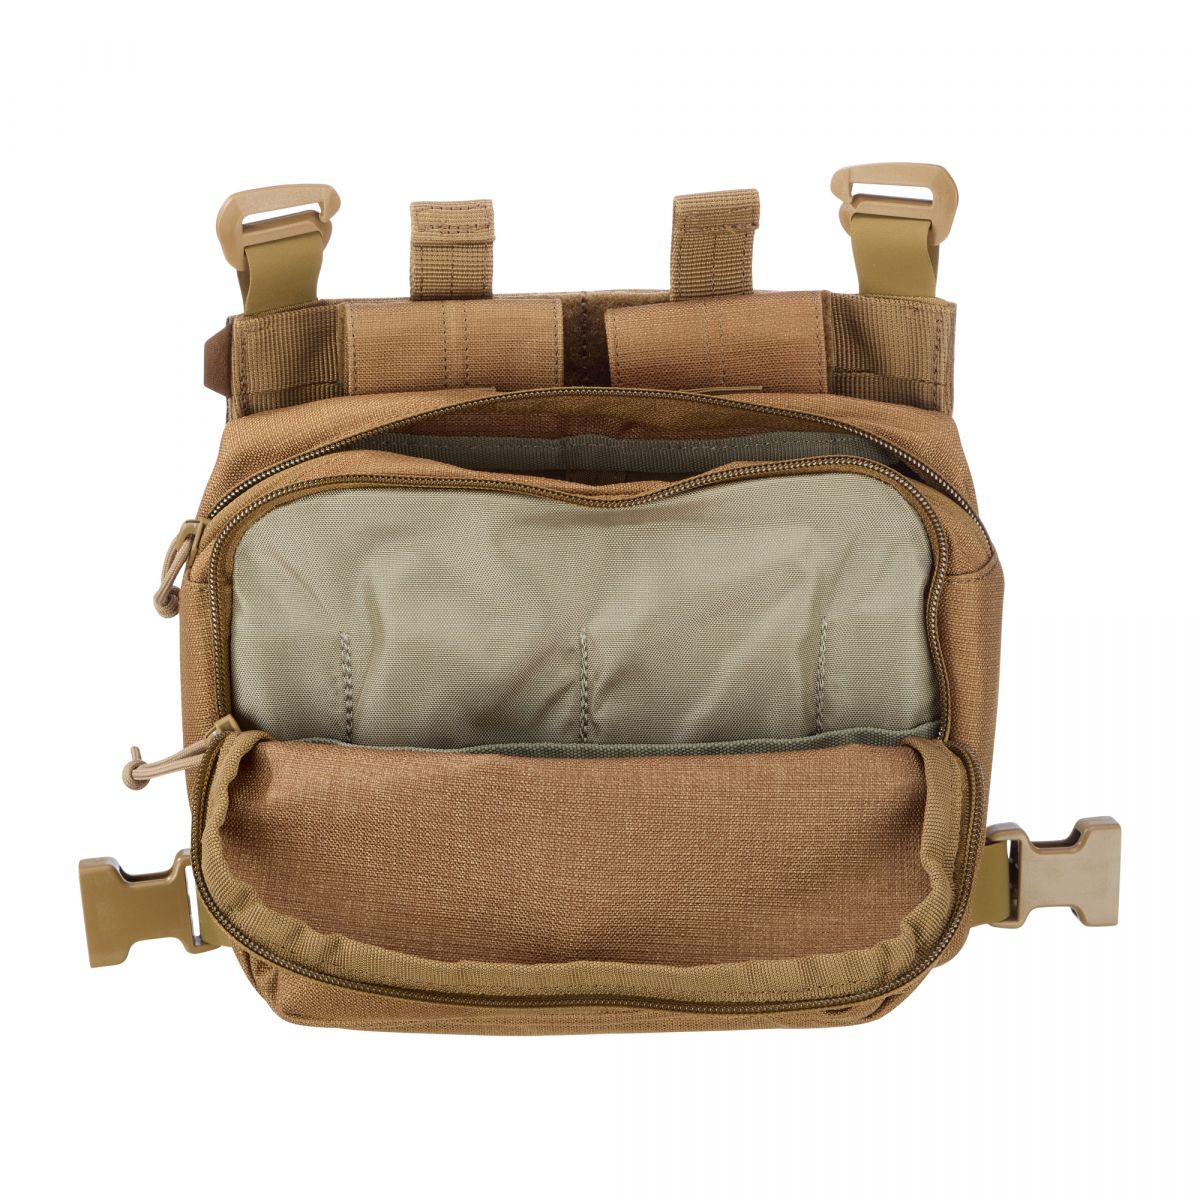 Purchase the 5.11 Pouch 2 Banger Gear Set kangaroo by ASMC